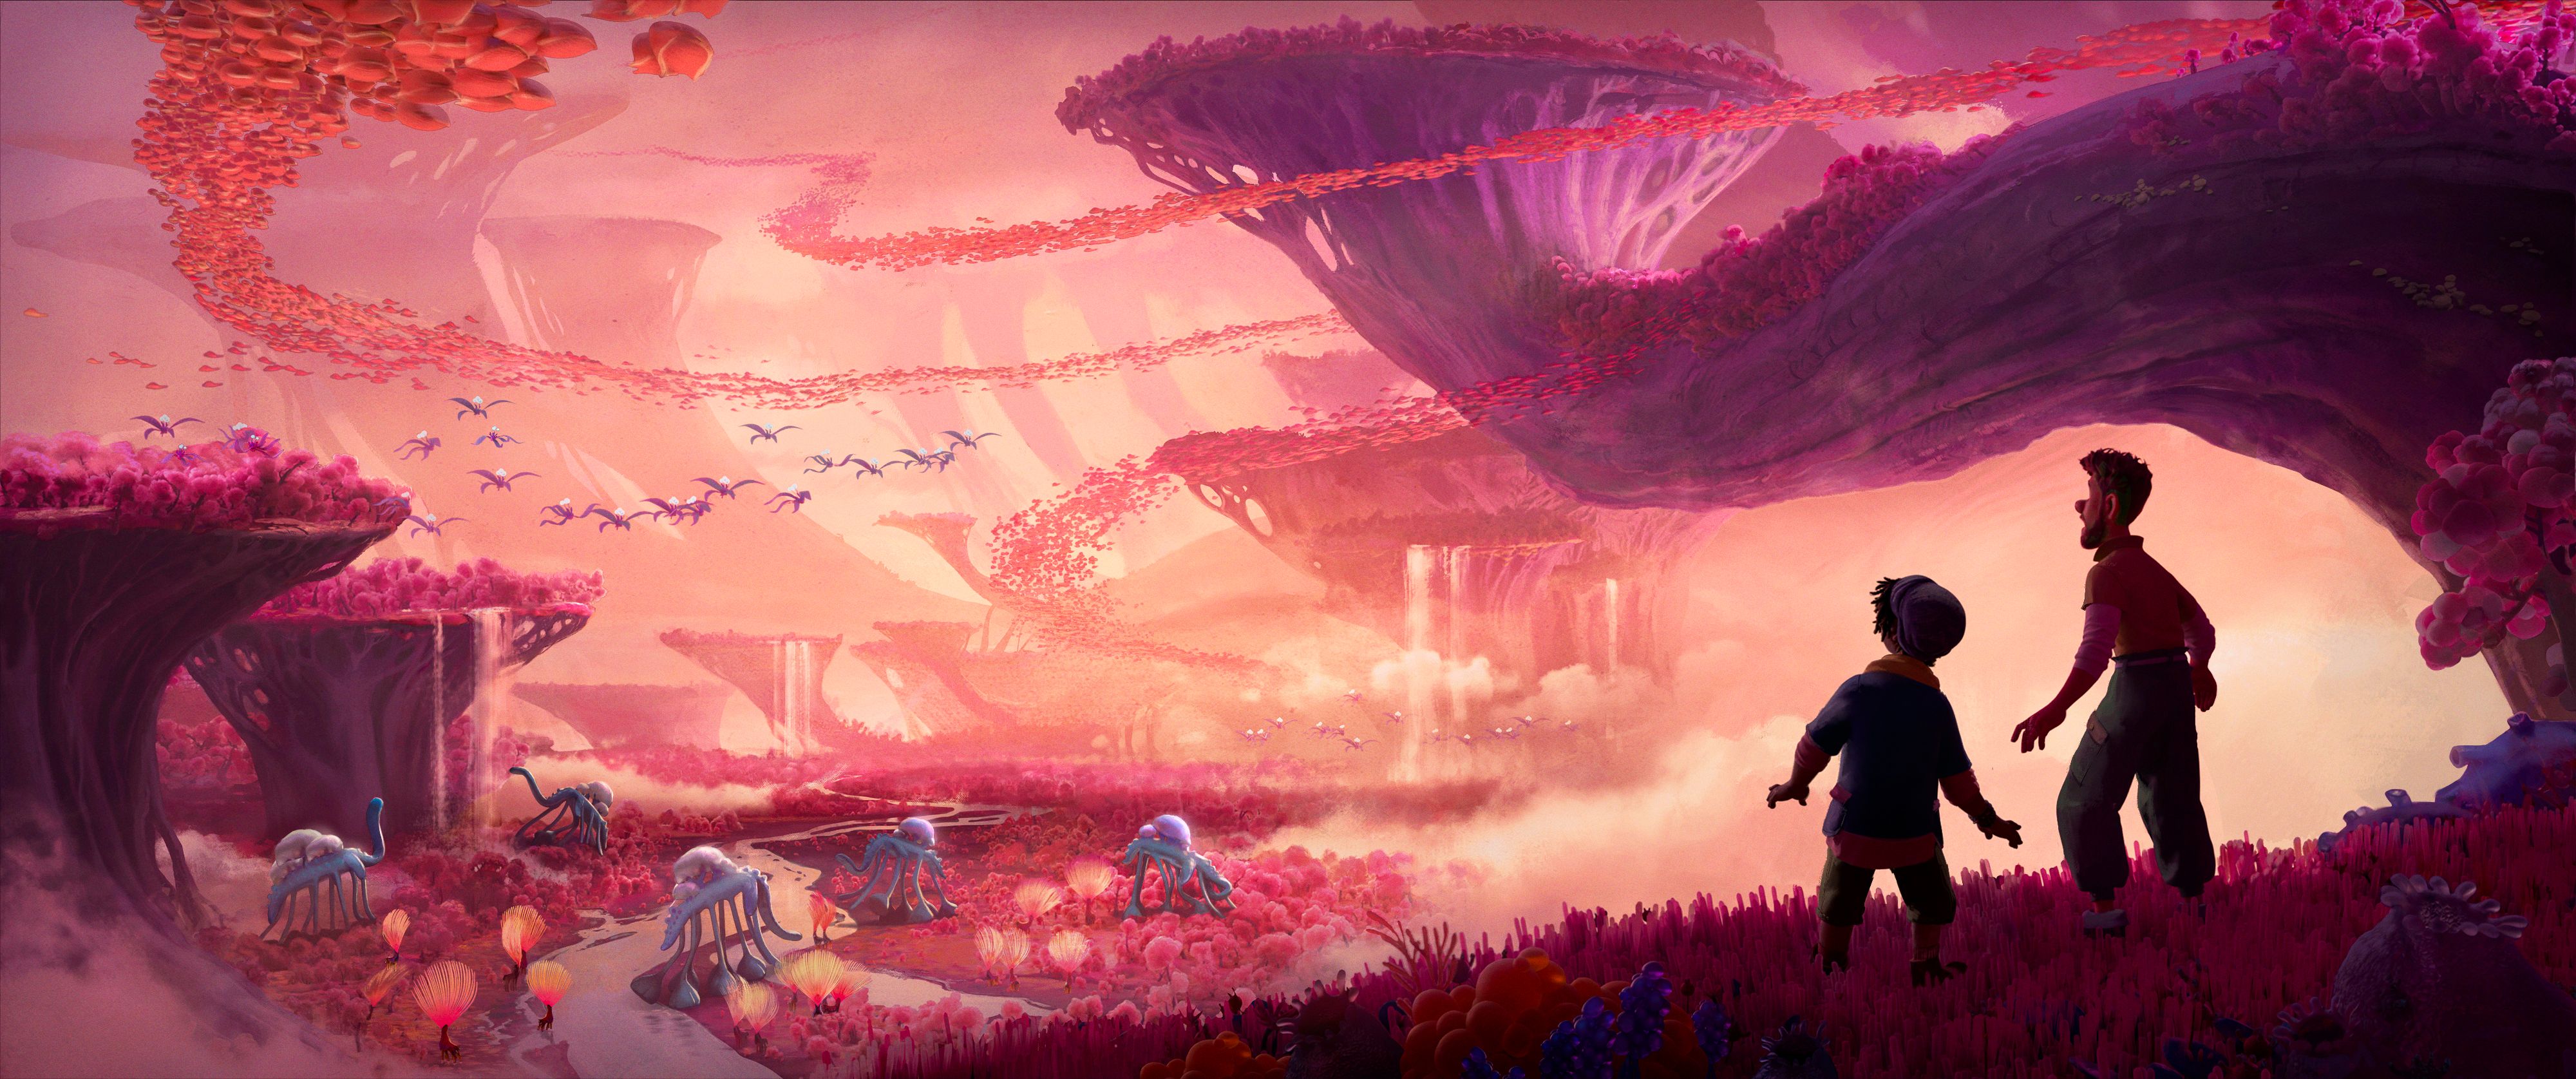 Here’s a First Look of Disney’s Strange World